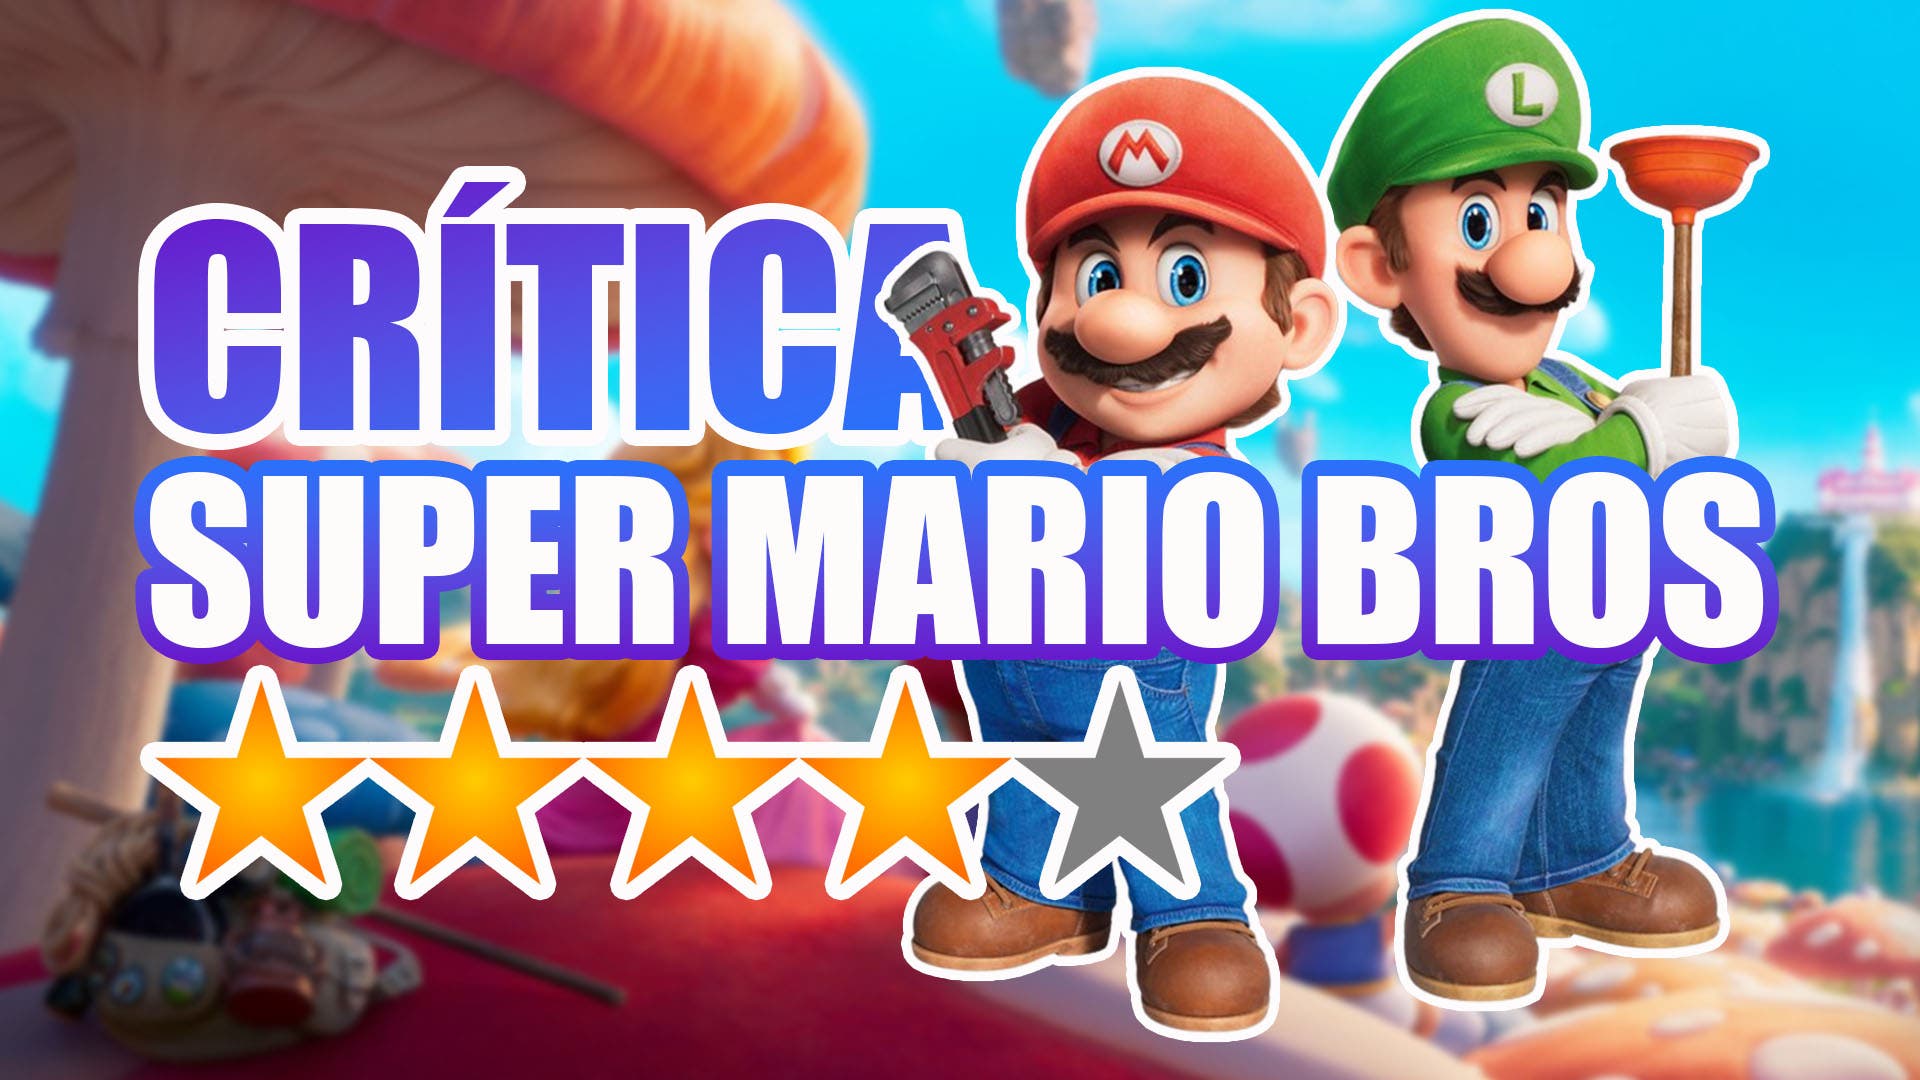 Super Mario Bros review: A seriously funny love letter to video gaming